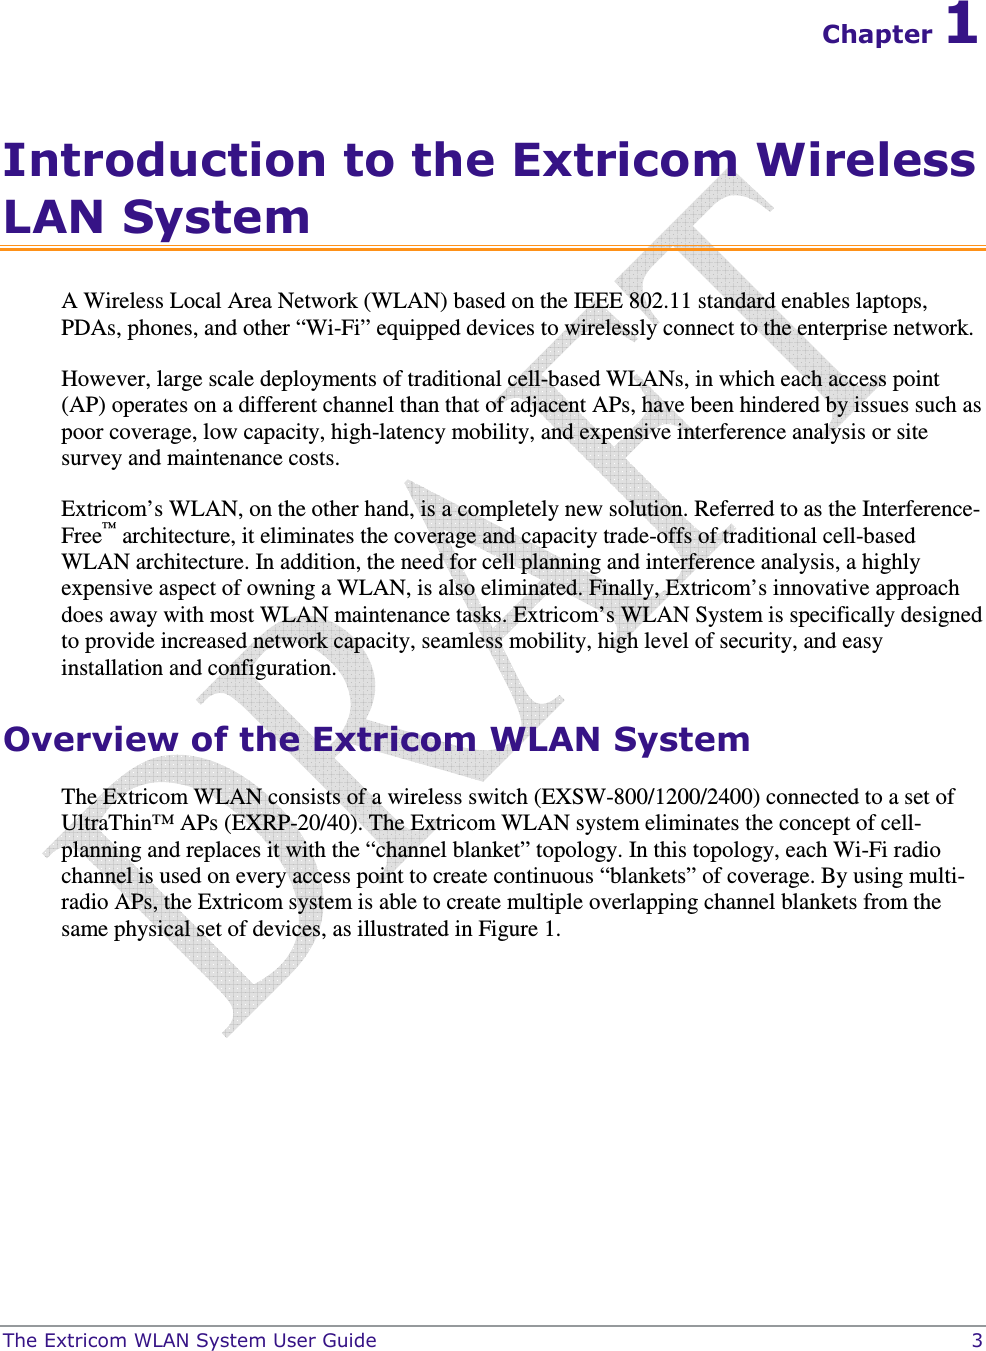  The Extricom WLAN System User Guide    3 Chapter 1 Introduction to the Extricom Wireless LAN System A Wireless Local Area Network (WLAN) based on the IEEE 802.11 standard enables laptops, PDAs, phones, and other “Wi-Fi” equipped devices to wirelessly connect to the enterprise network.  However, large scale deployments of traditional cell-based WLANs, in which each access point (AP) operates on a different channel than that of adjacent APs, have been hindered by issues such as poor coverage, low capacity, high-latency mobility, and expensive interference analysis or site survey and maintenance costs.  Extricom’s WLAN, on the other hand, is a completely new solution. Referred to as the Interference-Free™ architecture, it eliminates the coverage and capacity trade-offs of traditional cell-based WLAN architecture. In addition, the need for cell planning and interference analysis, a highly expensive aspect of owning a WLAN, is also eliminated. Finally, Extricom’s innovative approach does away with most WLAN maintenance tasks. Extricom’s WLAN System is specifically designed to provide increased network capacity, seamless mobility, high level of security, and easy installation and configuration.  Overview of the Extricom WLAN System The Extricom WLAN consists of a wireless switch (EXSW-800/1200/2400) connected to a set of UltraThin™ APs (EXRP-20/40). The Extricom WLAN system eliminates the concept of cell-planning and replaces it with the “channel blanket” topology. In this topology, each Wi-Fi radio channel is used on every access point to create continuous “blankets” of coverage. By using multi-radio APs, the Extricom system is able to create multiple overlapping channel blankets from the same physical set of devices, as illustrated in Figure 1. 